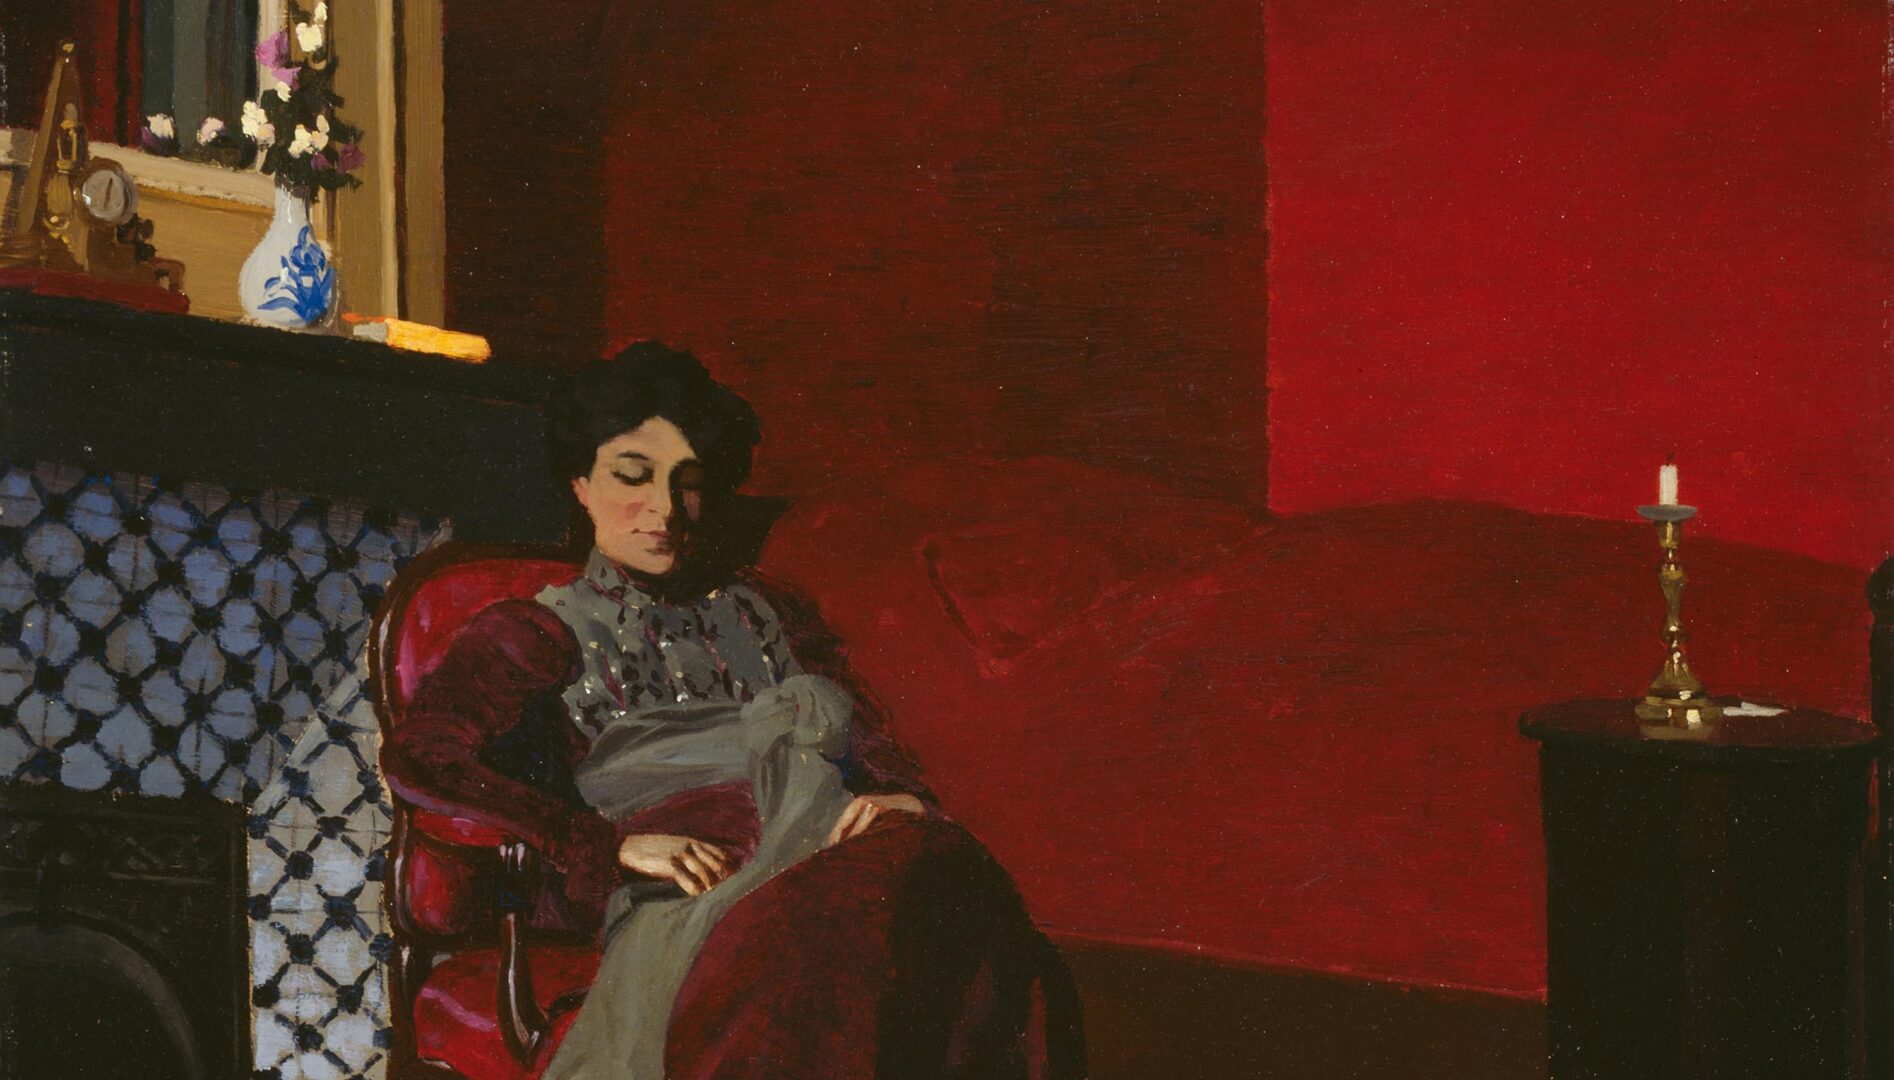 Painting of a woman in a red and grey dress sitting in a red chair in a red living room, looking down at a baby in a pink dress